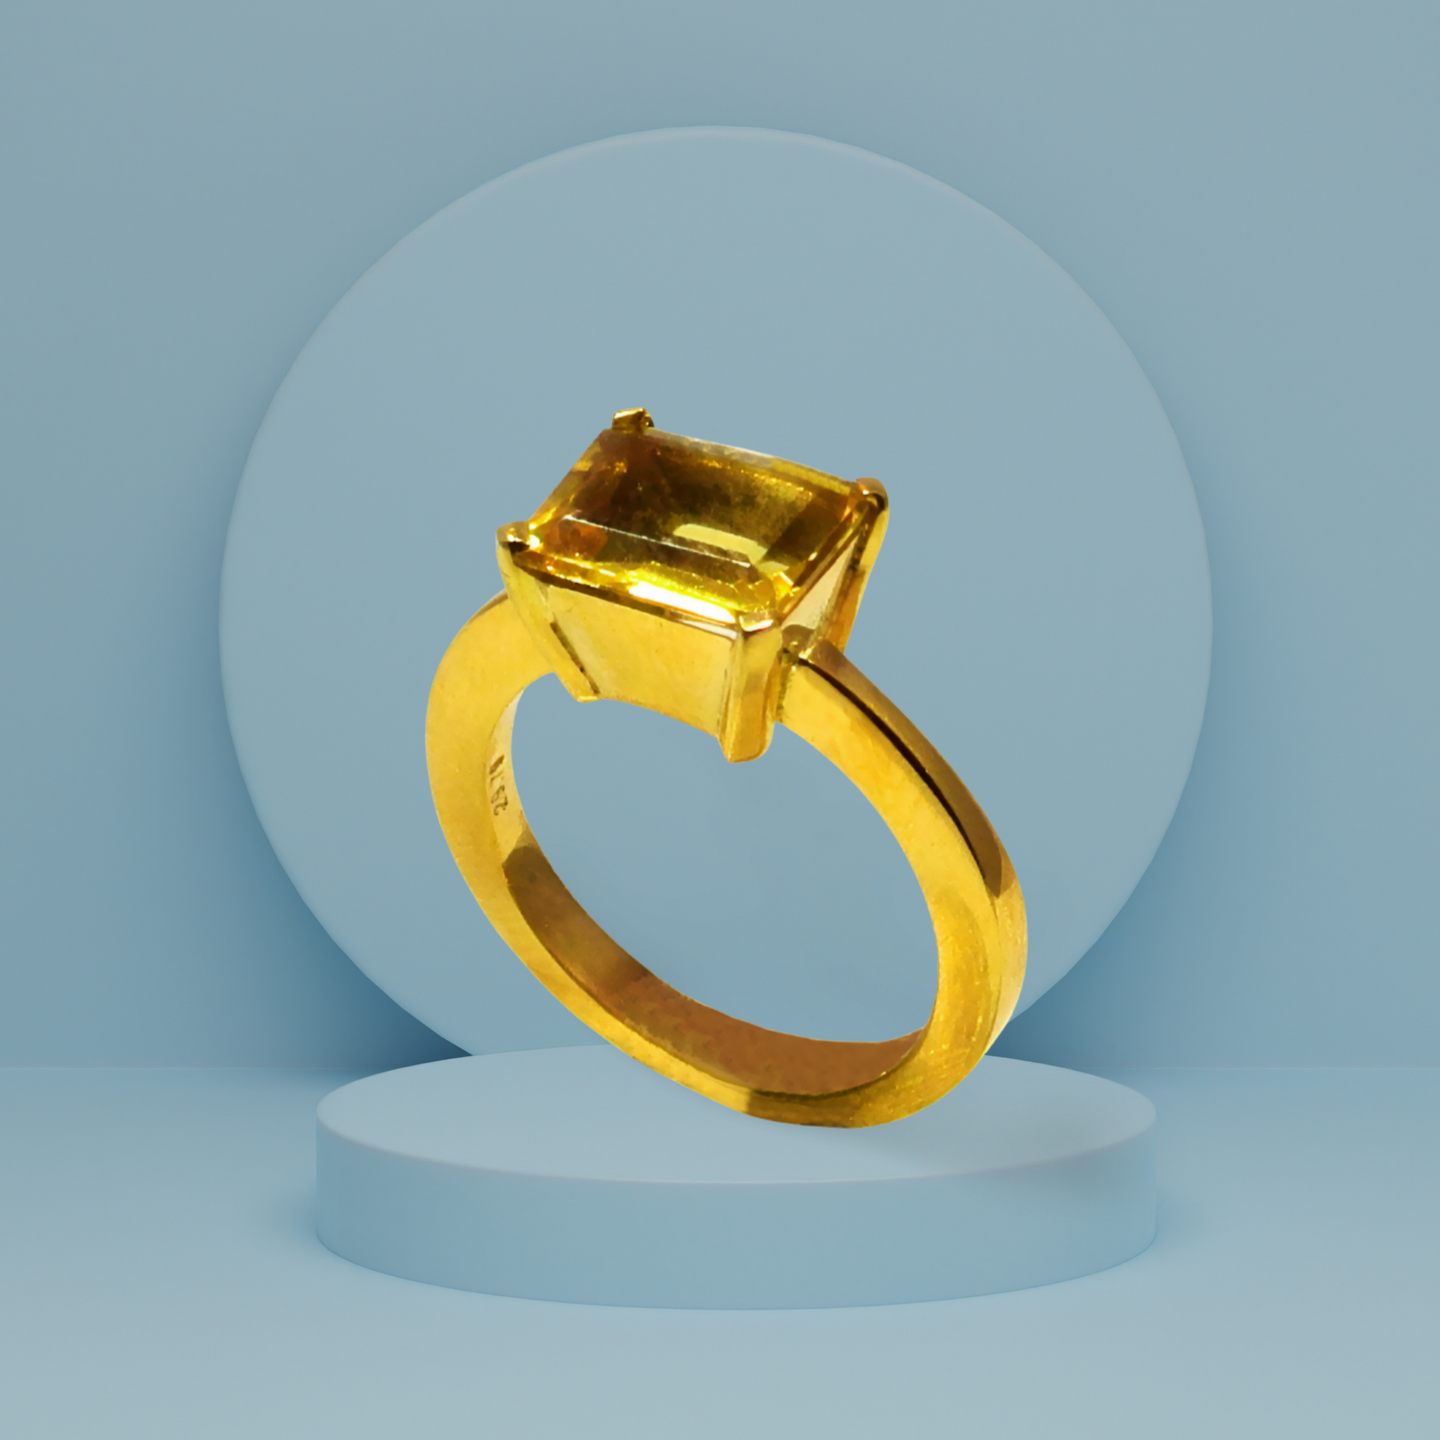 Ring in 18k Gold with a faceted citrine (B-51)